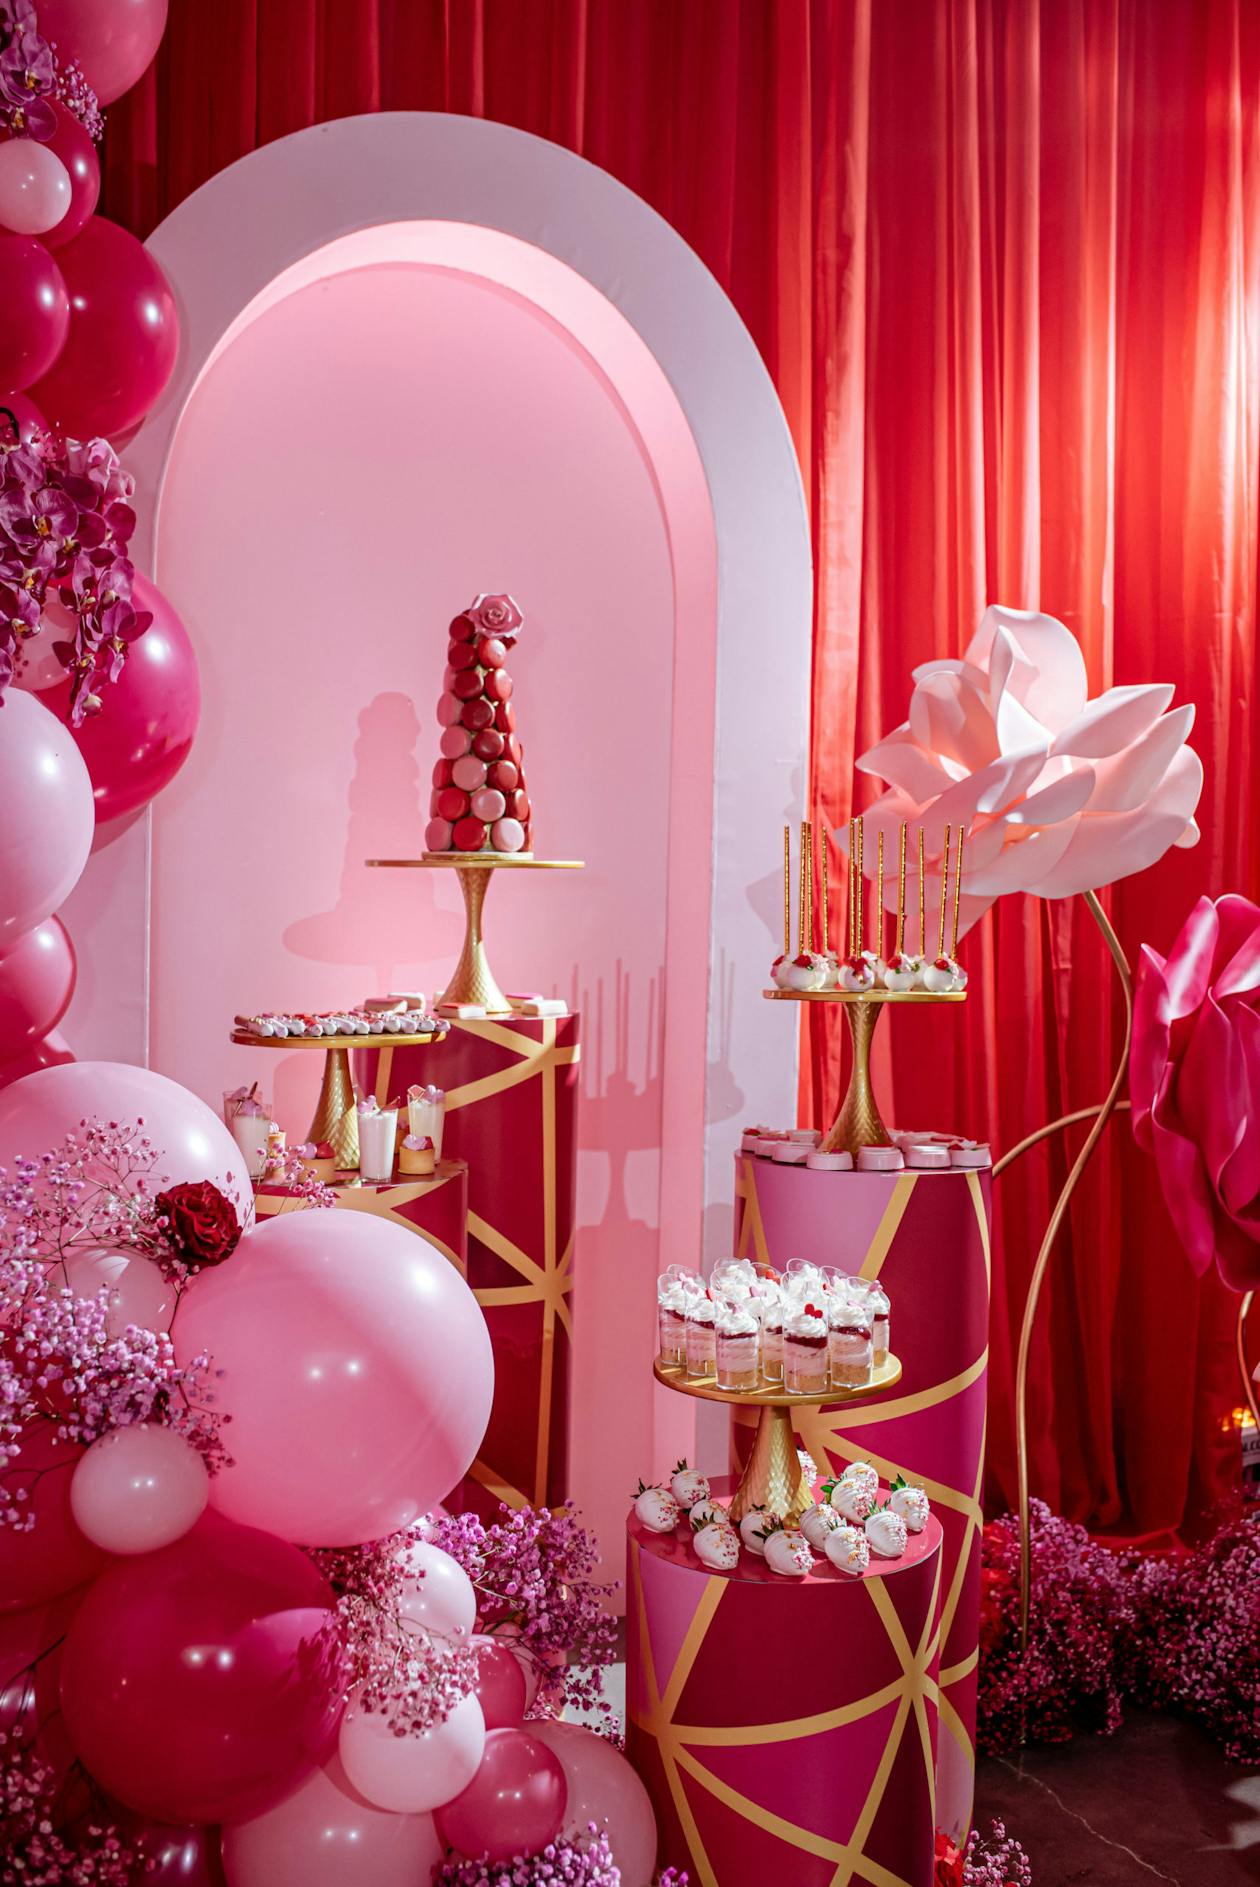 pink macaroon tower with dessert display at baby shower surrounded by pink balloons and décor | PartySlate